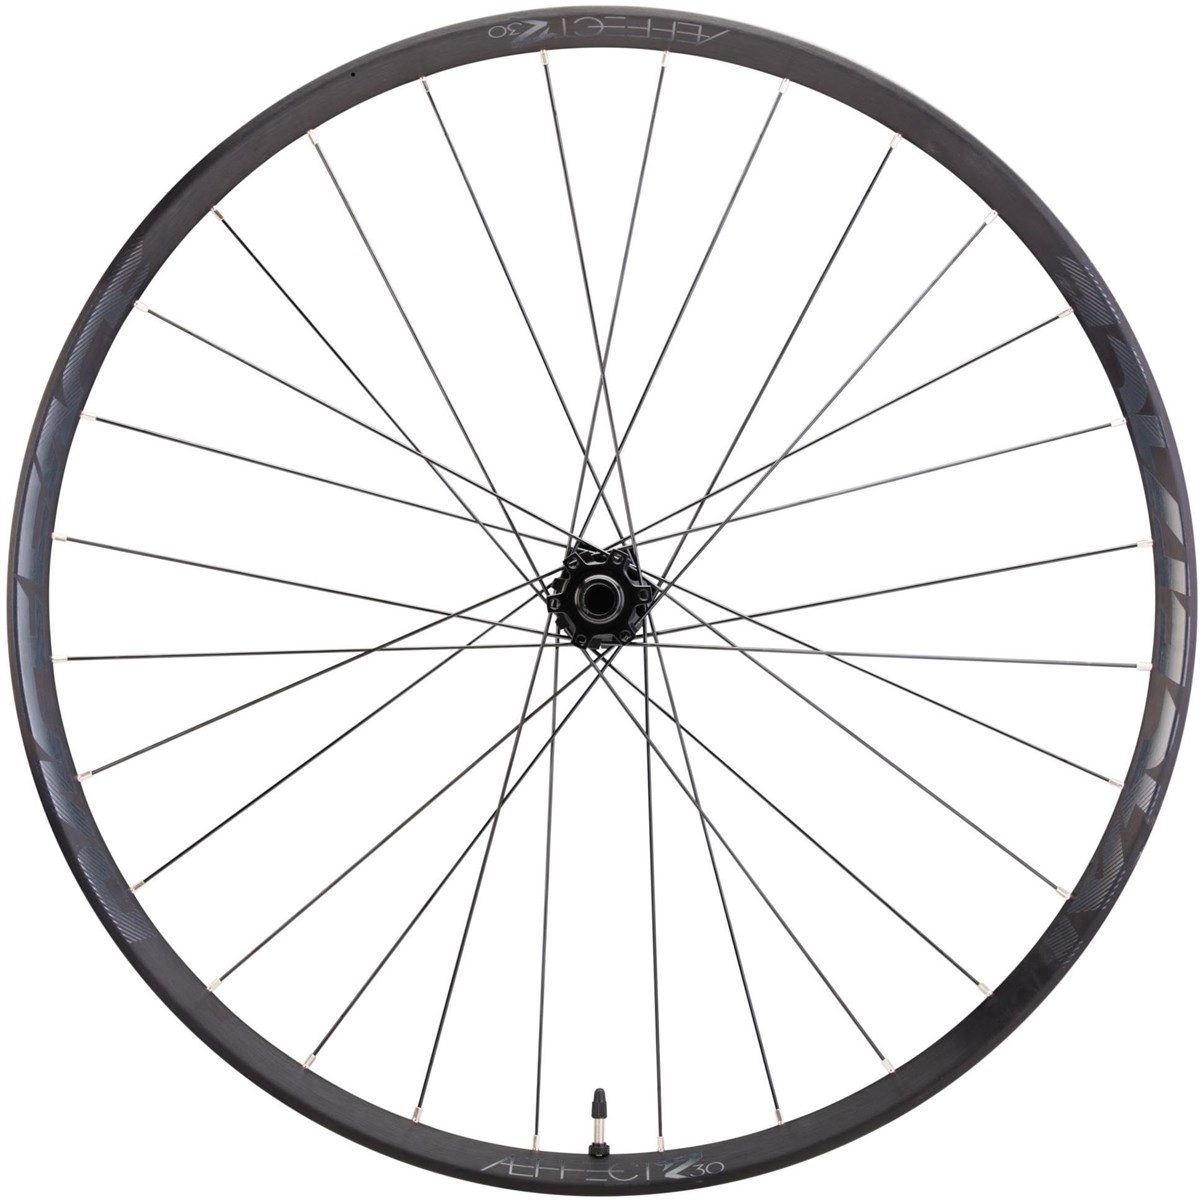 Race Face AEffect R Wheels - 29" product image